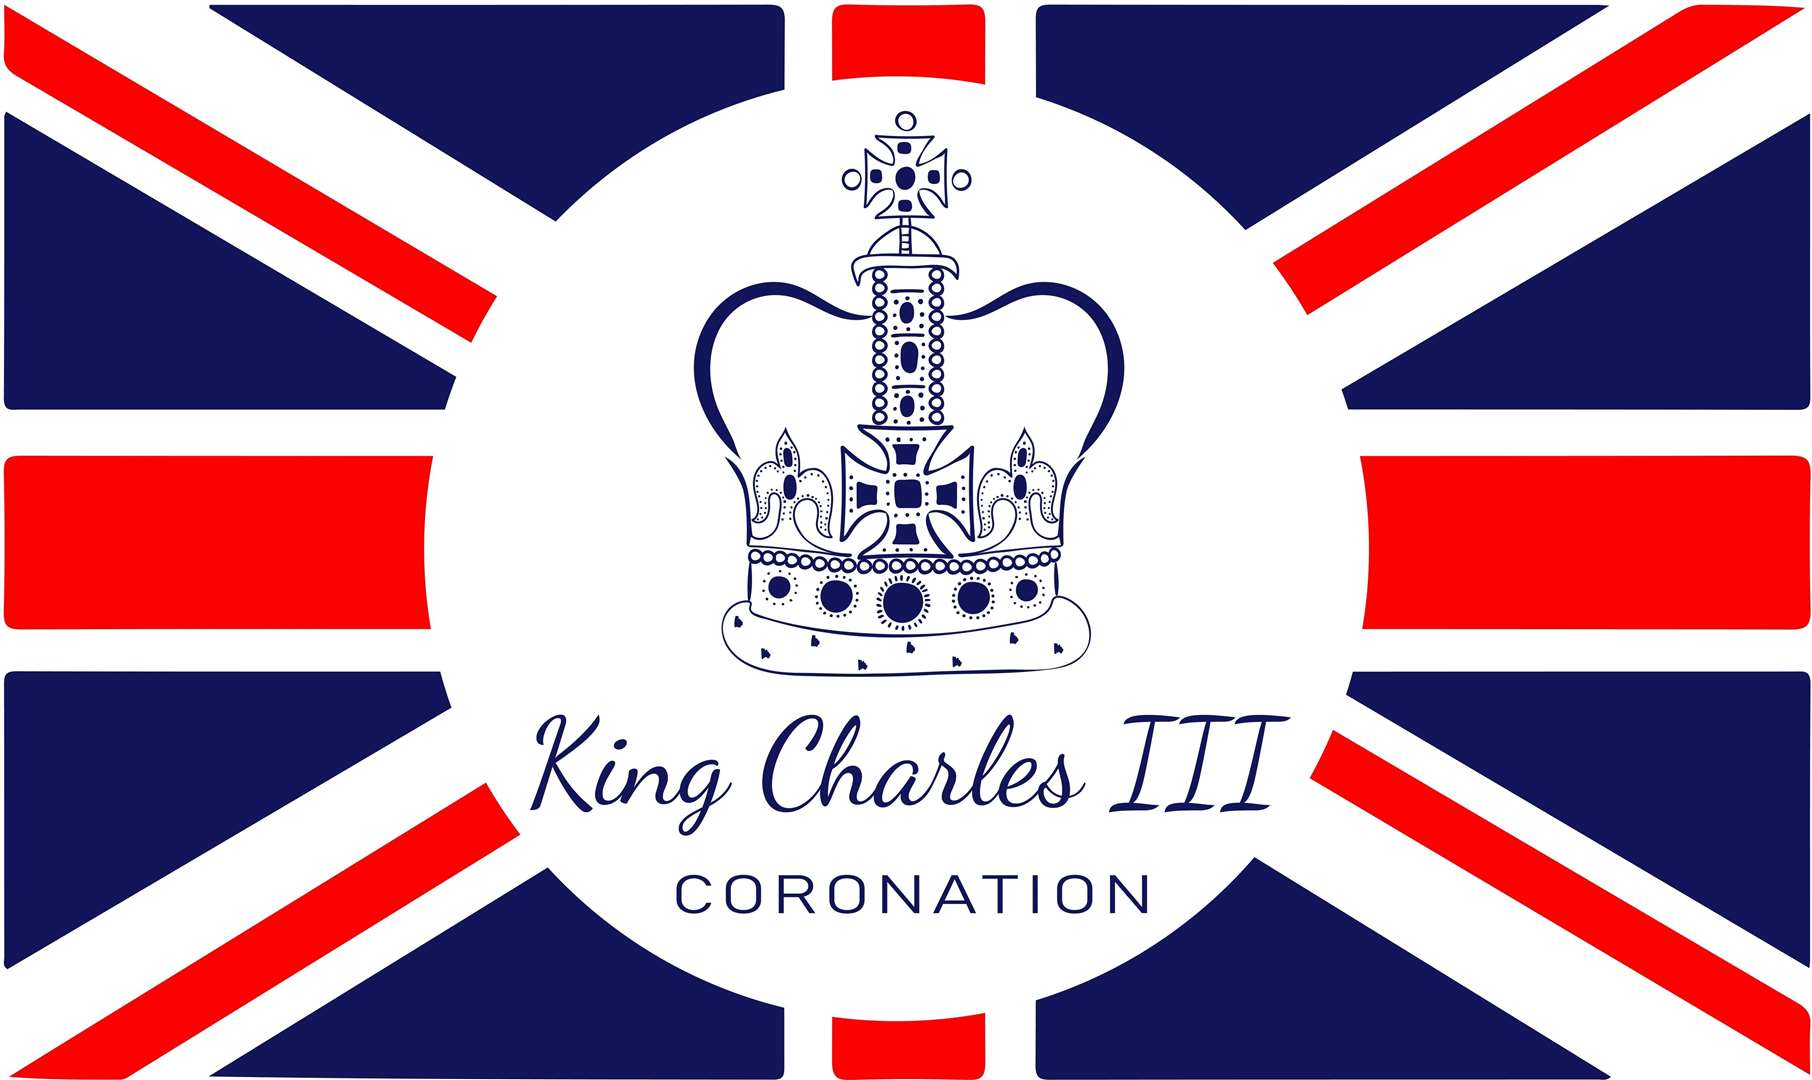 It was recently announced that the coronation of Charles III and Camilla, Queen Consort, is to be held on Saturday, May 6.